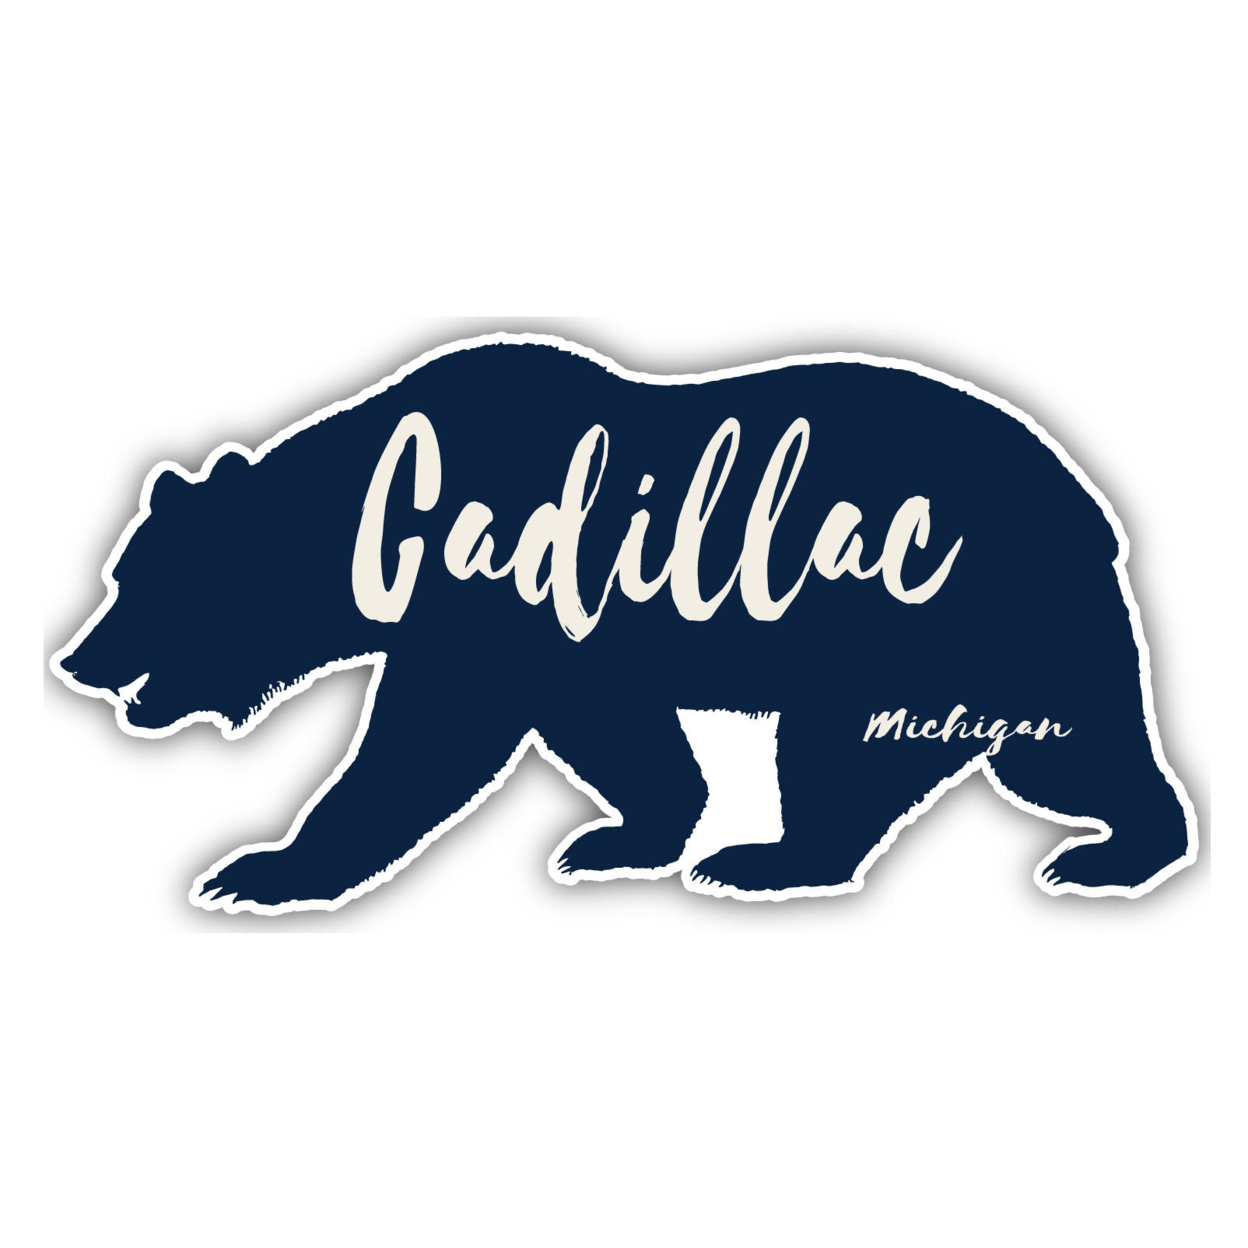 Cadillac Michigan Souvenir Decorative Stickers (Choose Theme And Size) - Single Unit, 8-Inch, Great Outdoors